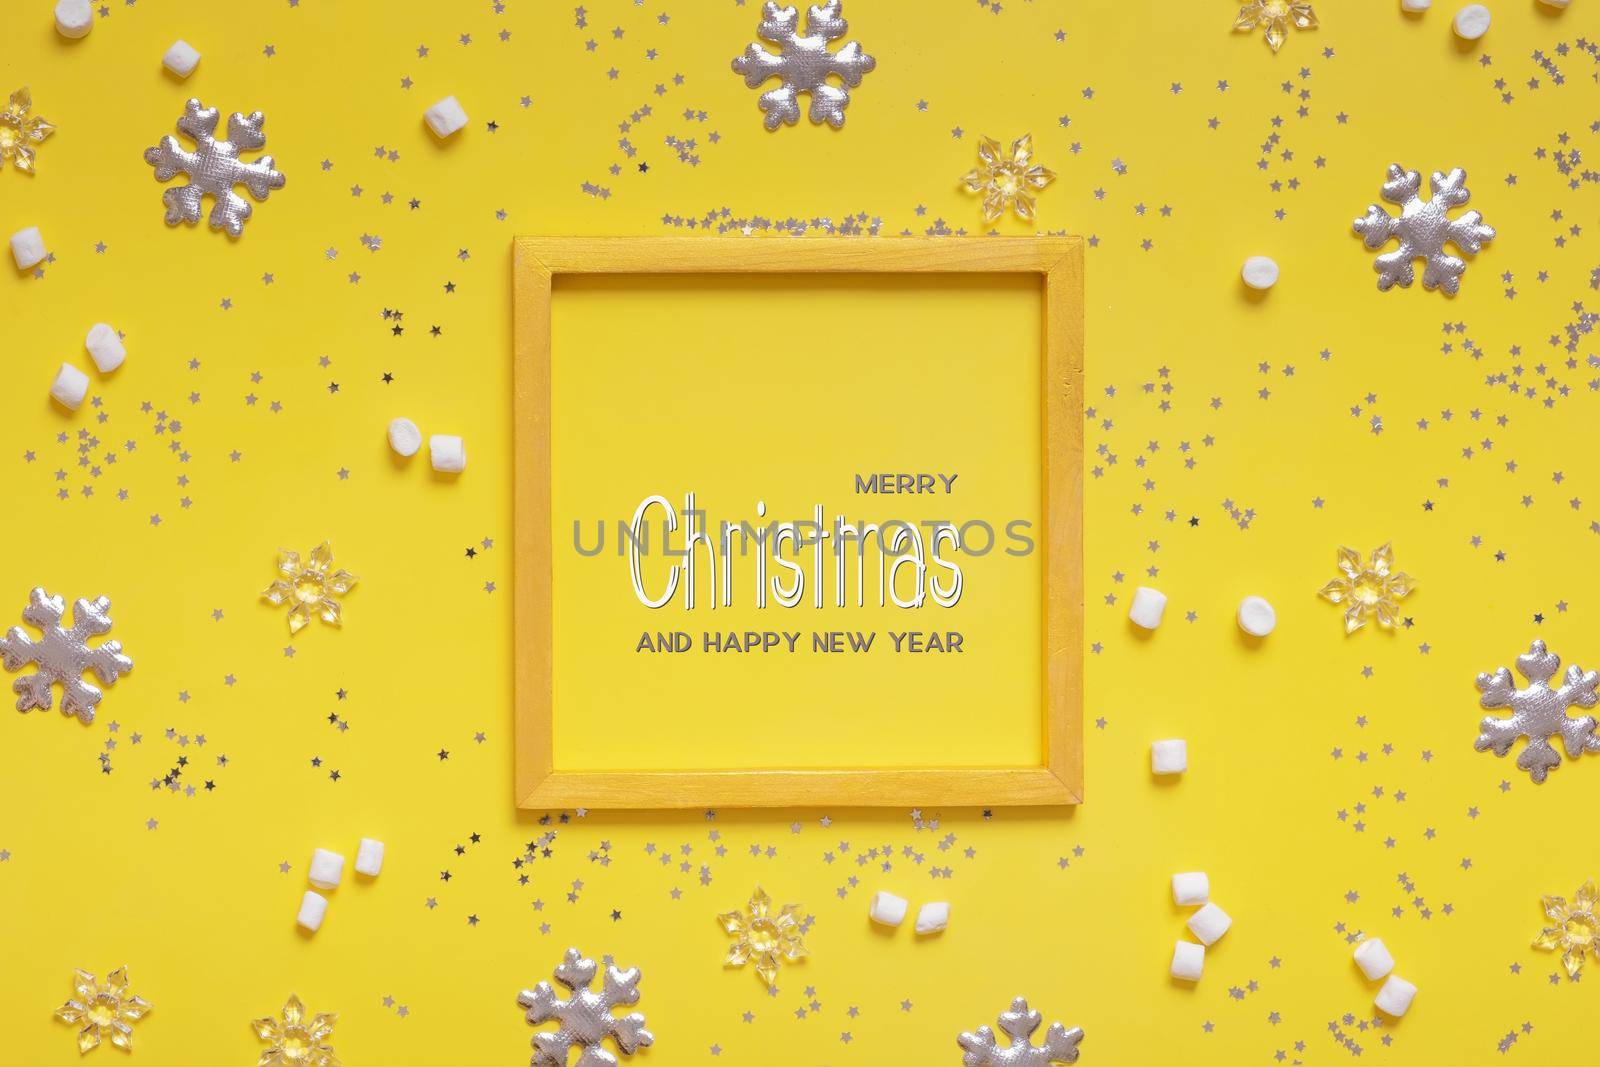 Merry Christmas greeting text in wooden frame with winter decoration on colored background. by ssvimaliss